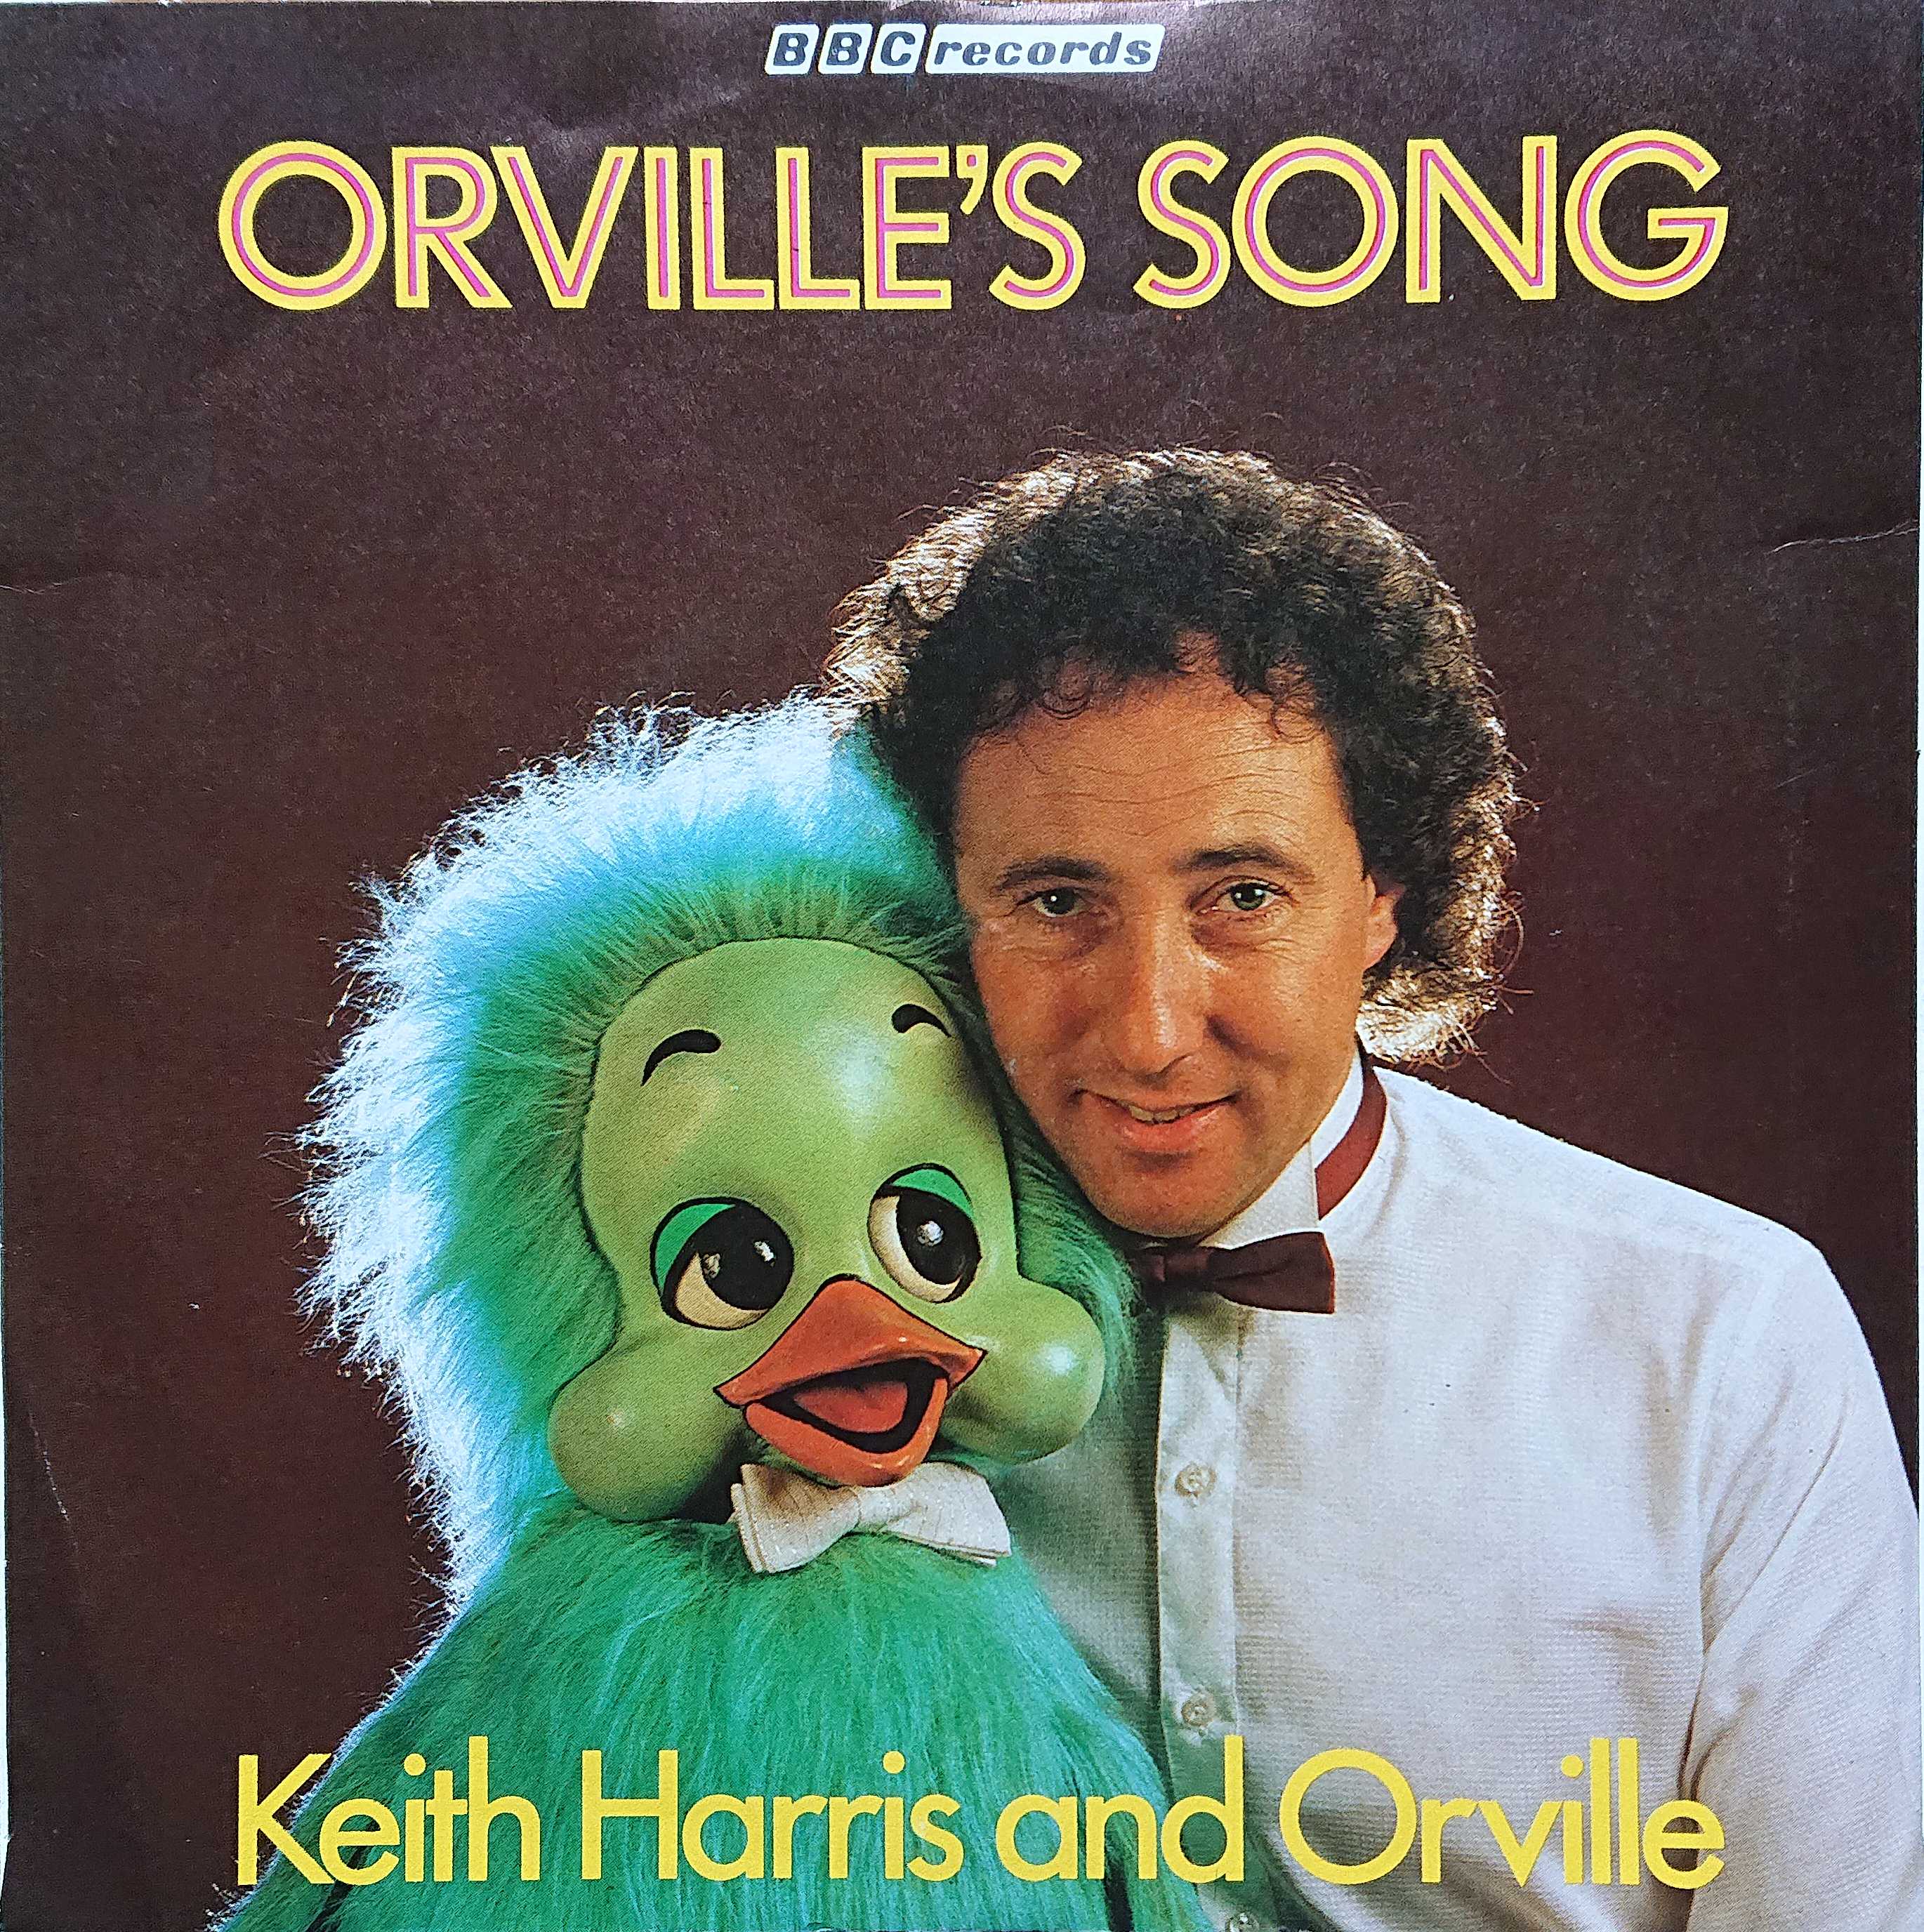 Picture of RESL 124-iD Orville's song by artist Keith Harris and Orville from the BBC singles - Records and Tapes library